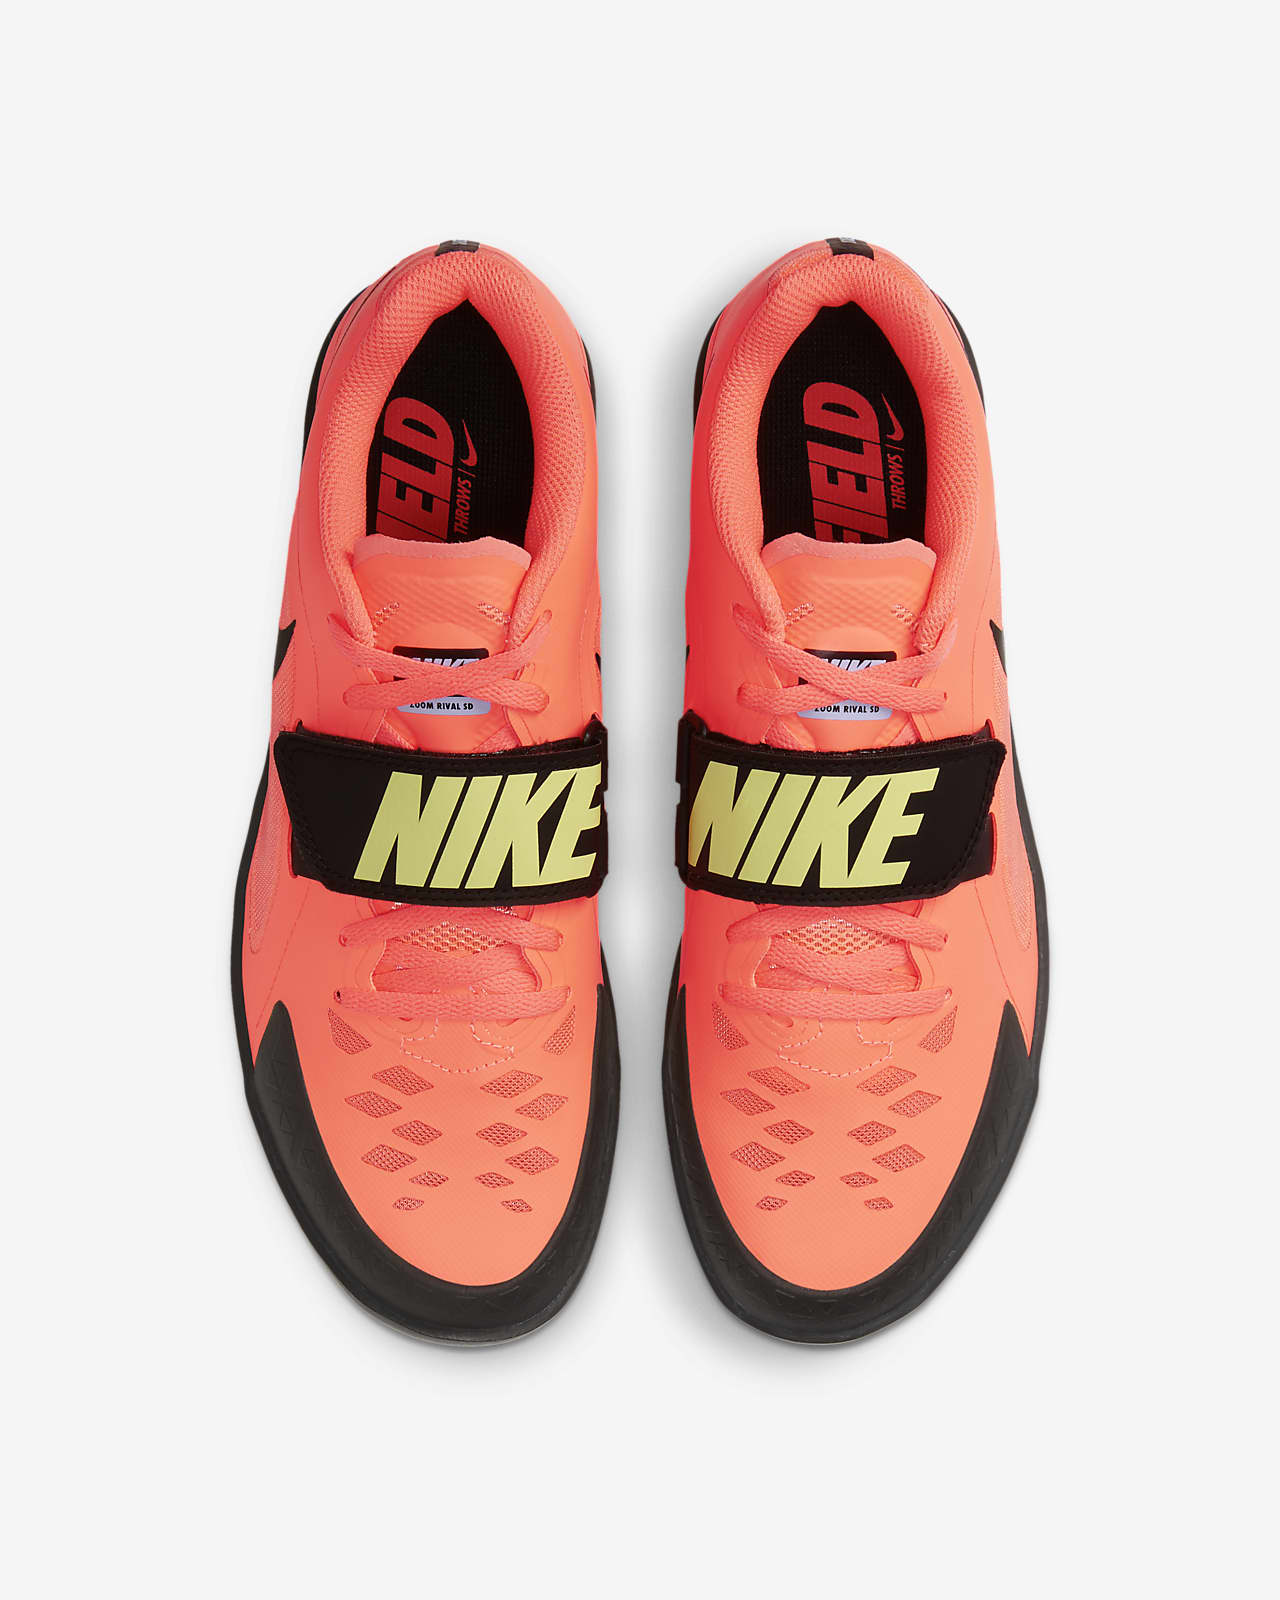 nike sd 2 throwing shoes